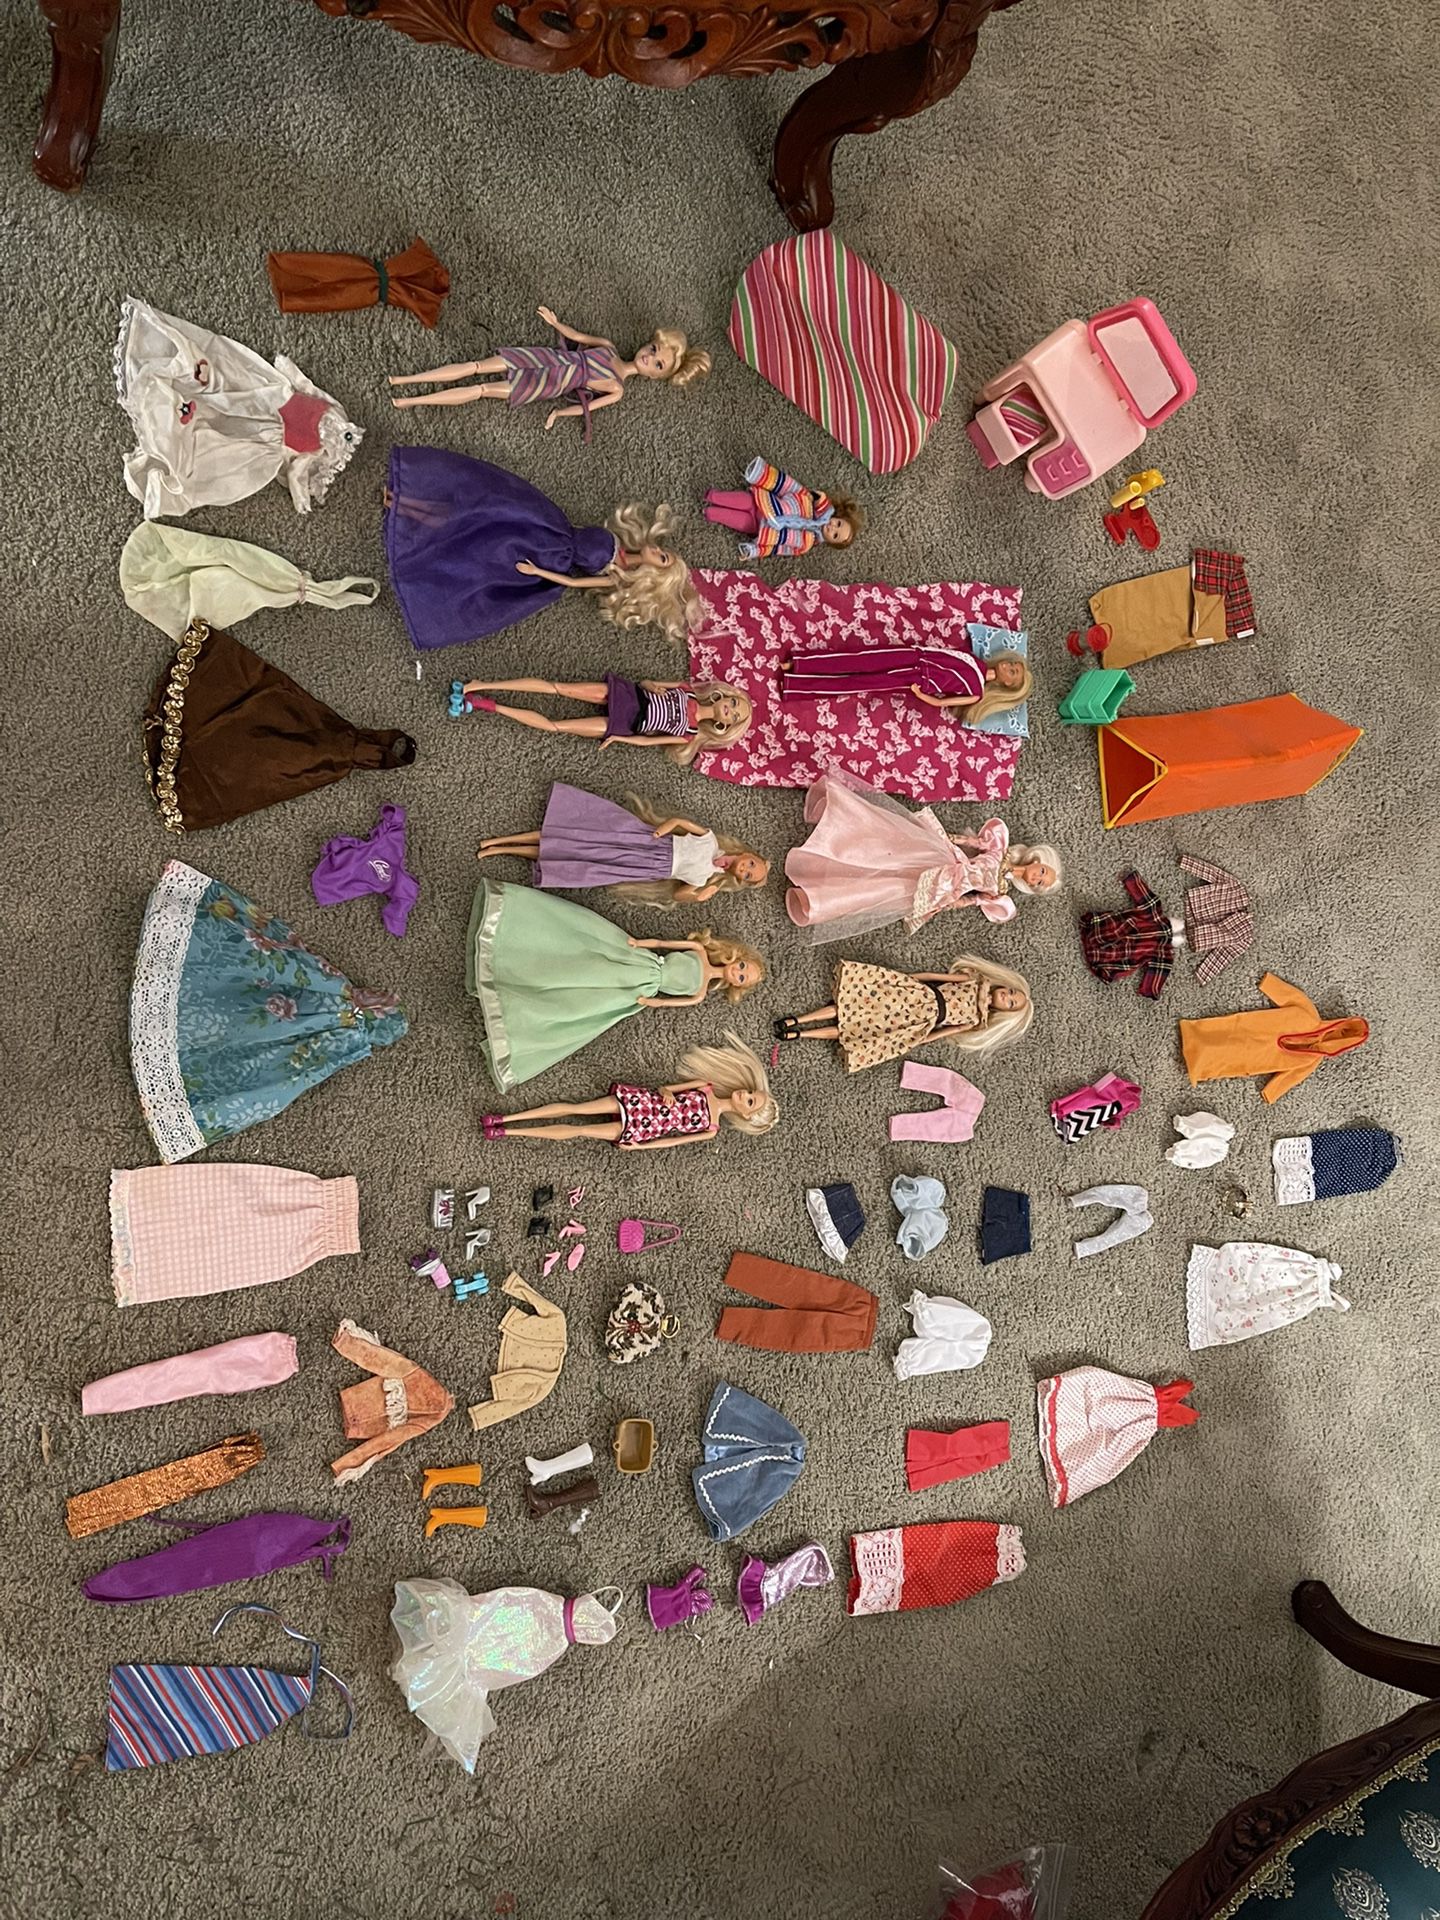 GIANT LOT Vintage Barbies, Clothes, Camping gear, Accessories 